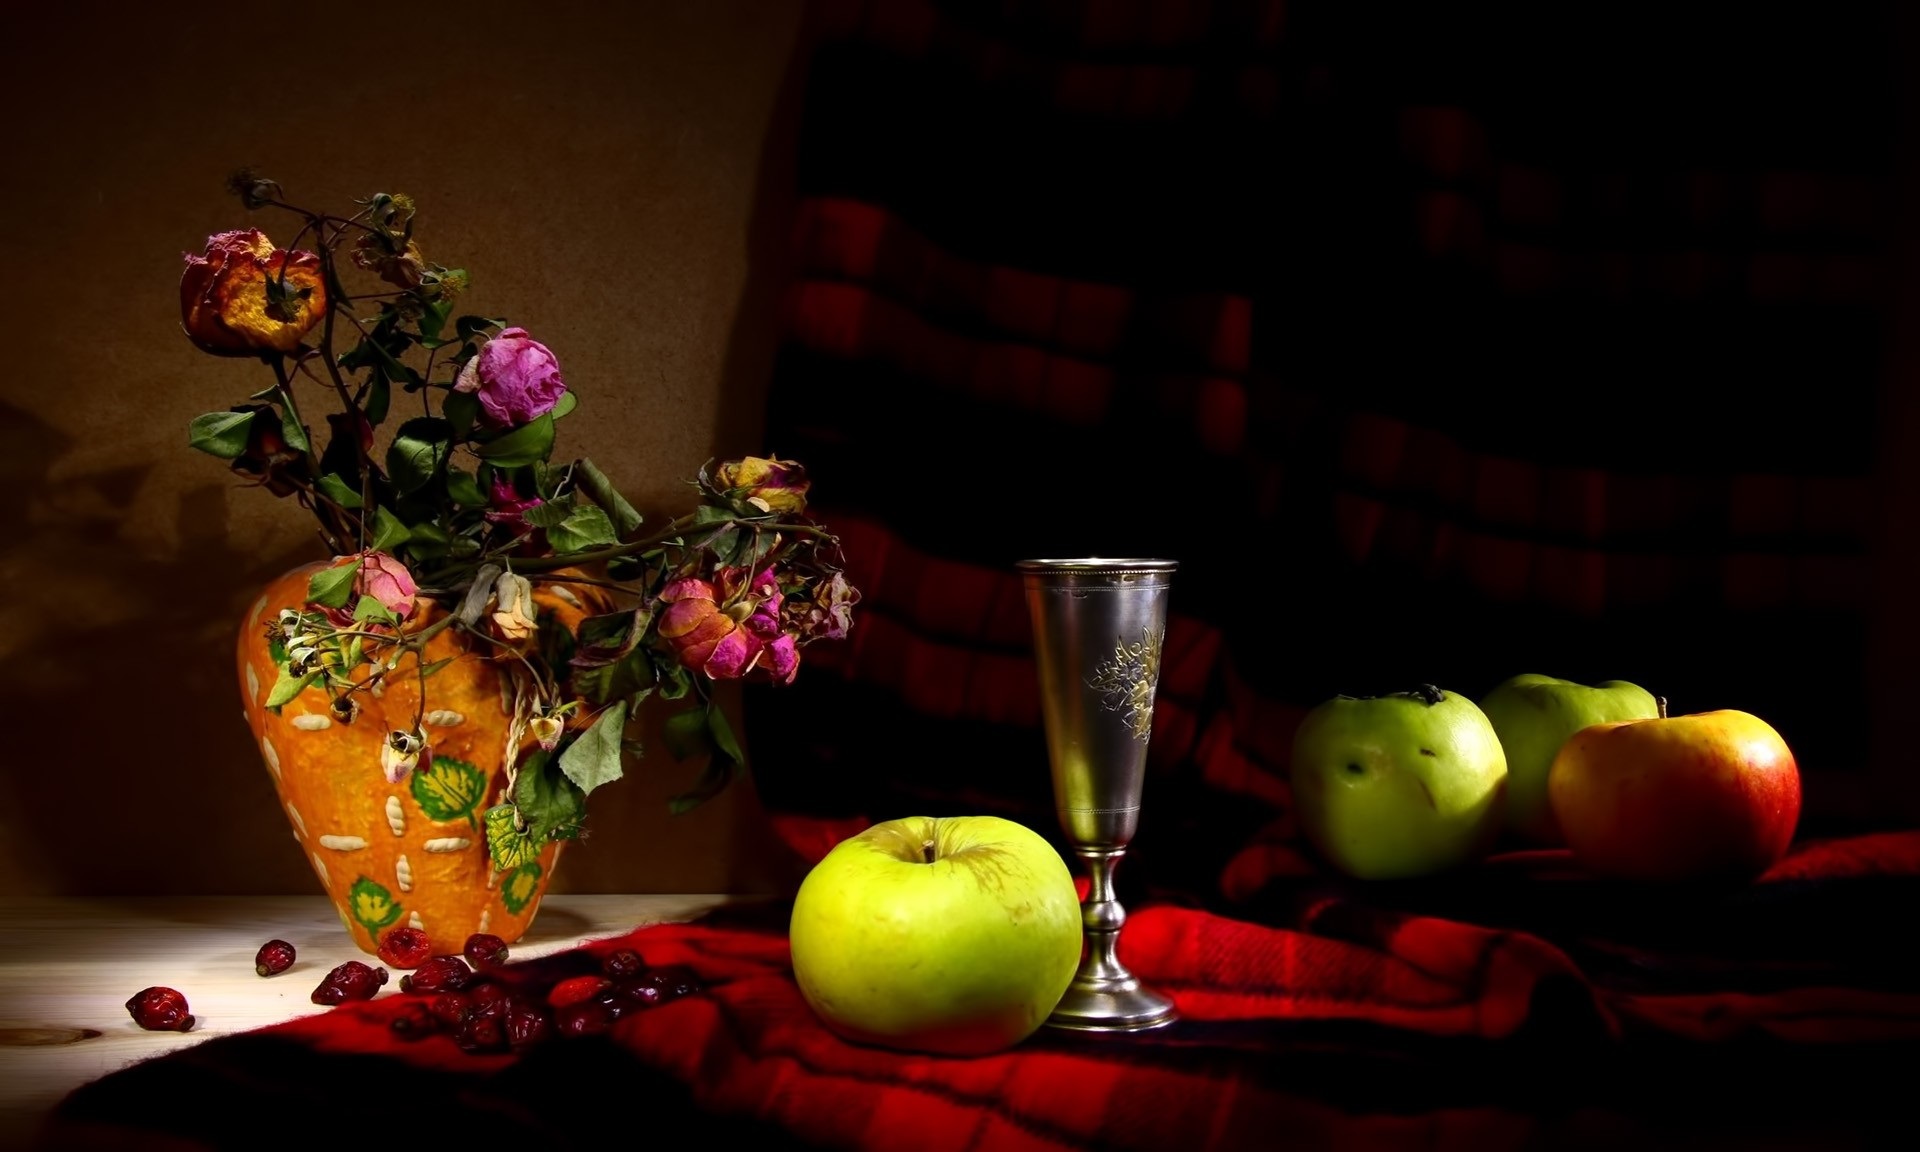 Still Life HD Wallpaper Background Of Your Choice